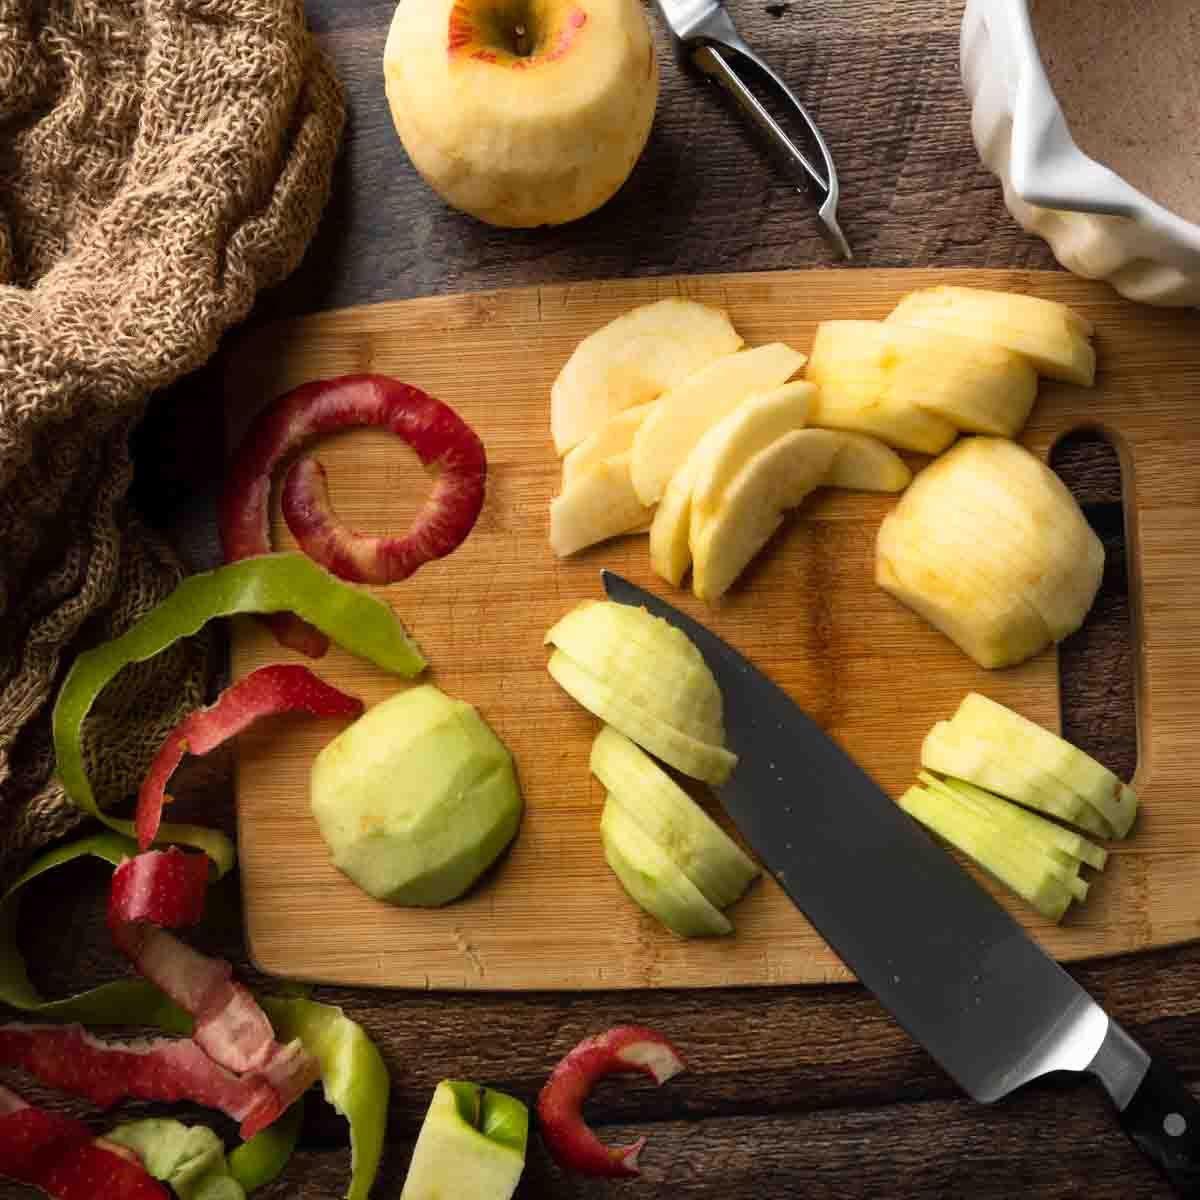 A cutting board filled with sliced apples, apple peels and a knife